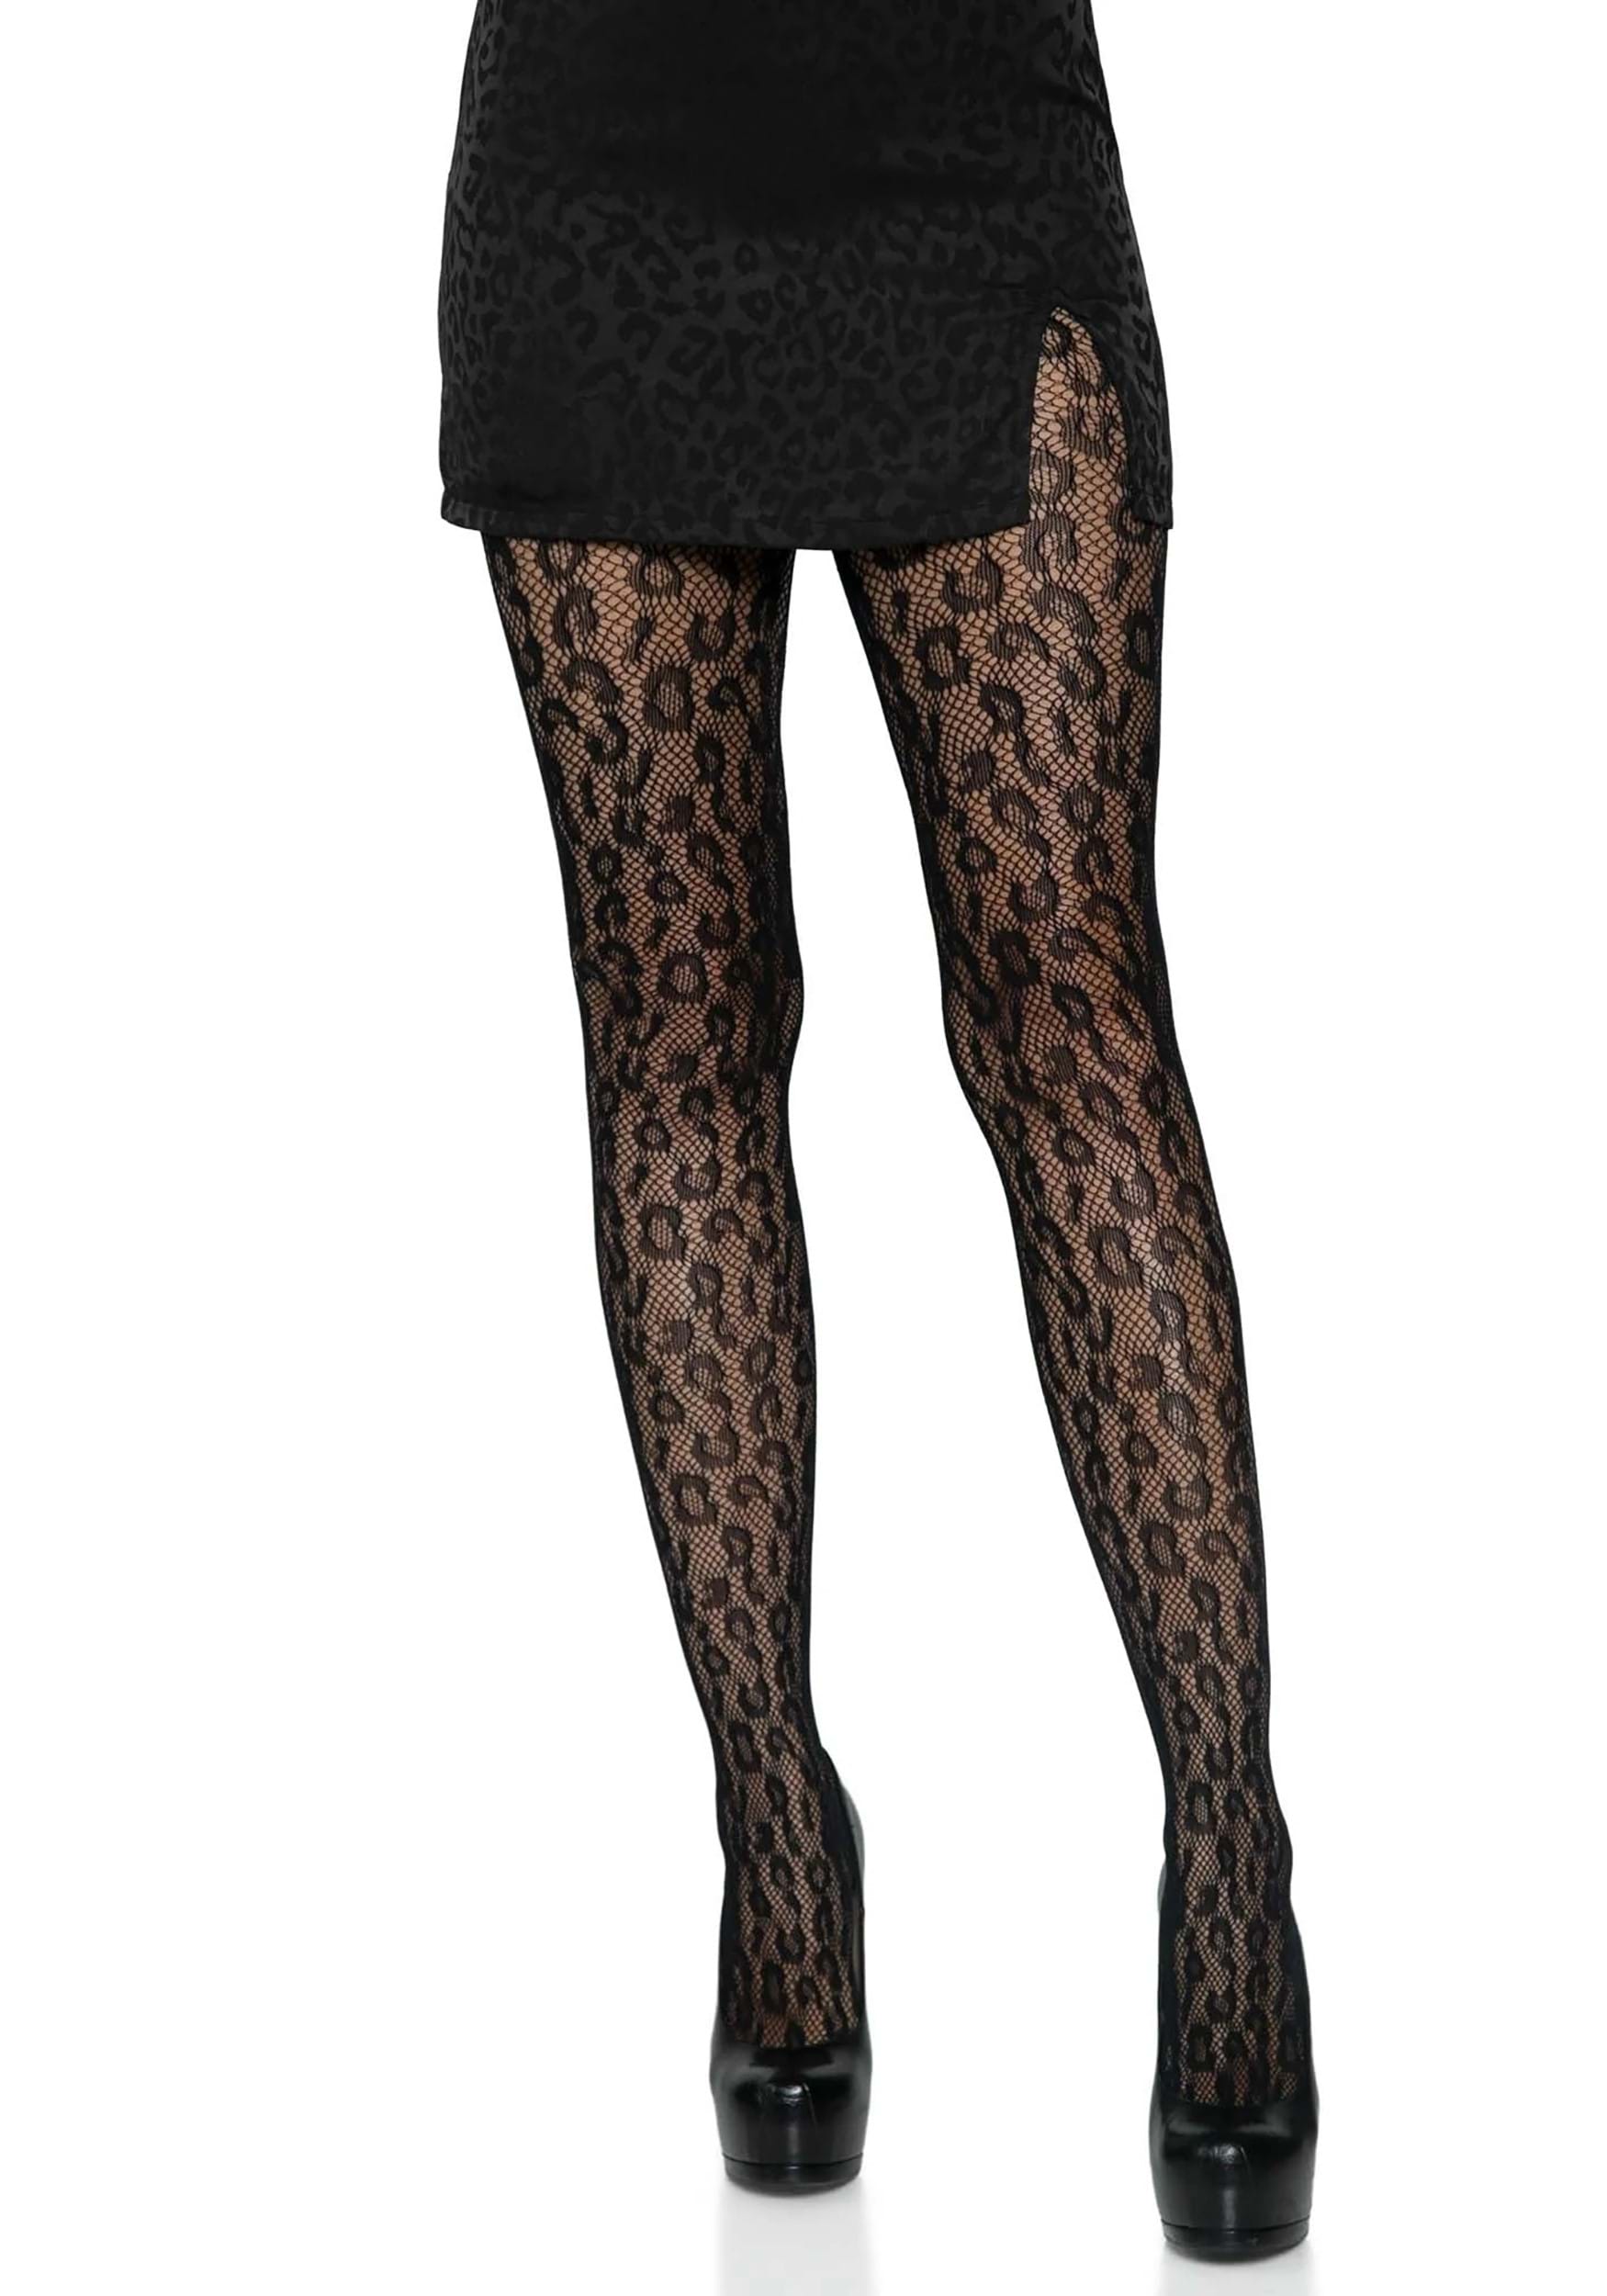 https://images.halloween.com/products/82971/1-1/black-leopard-net-tights.jpg